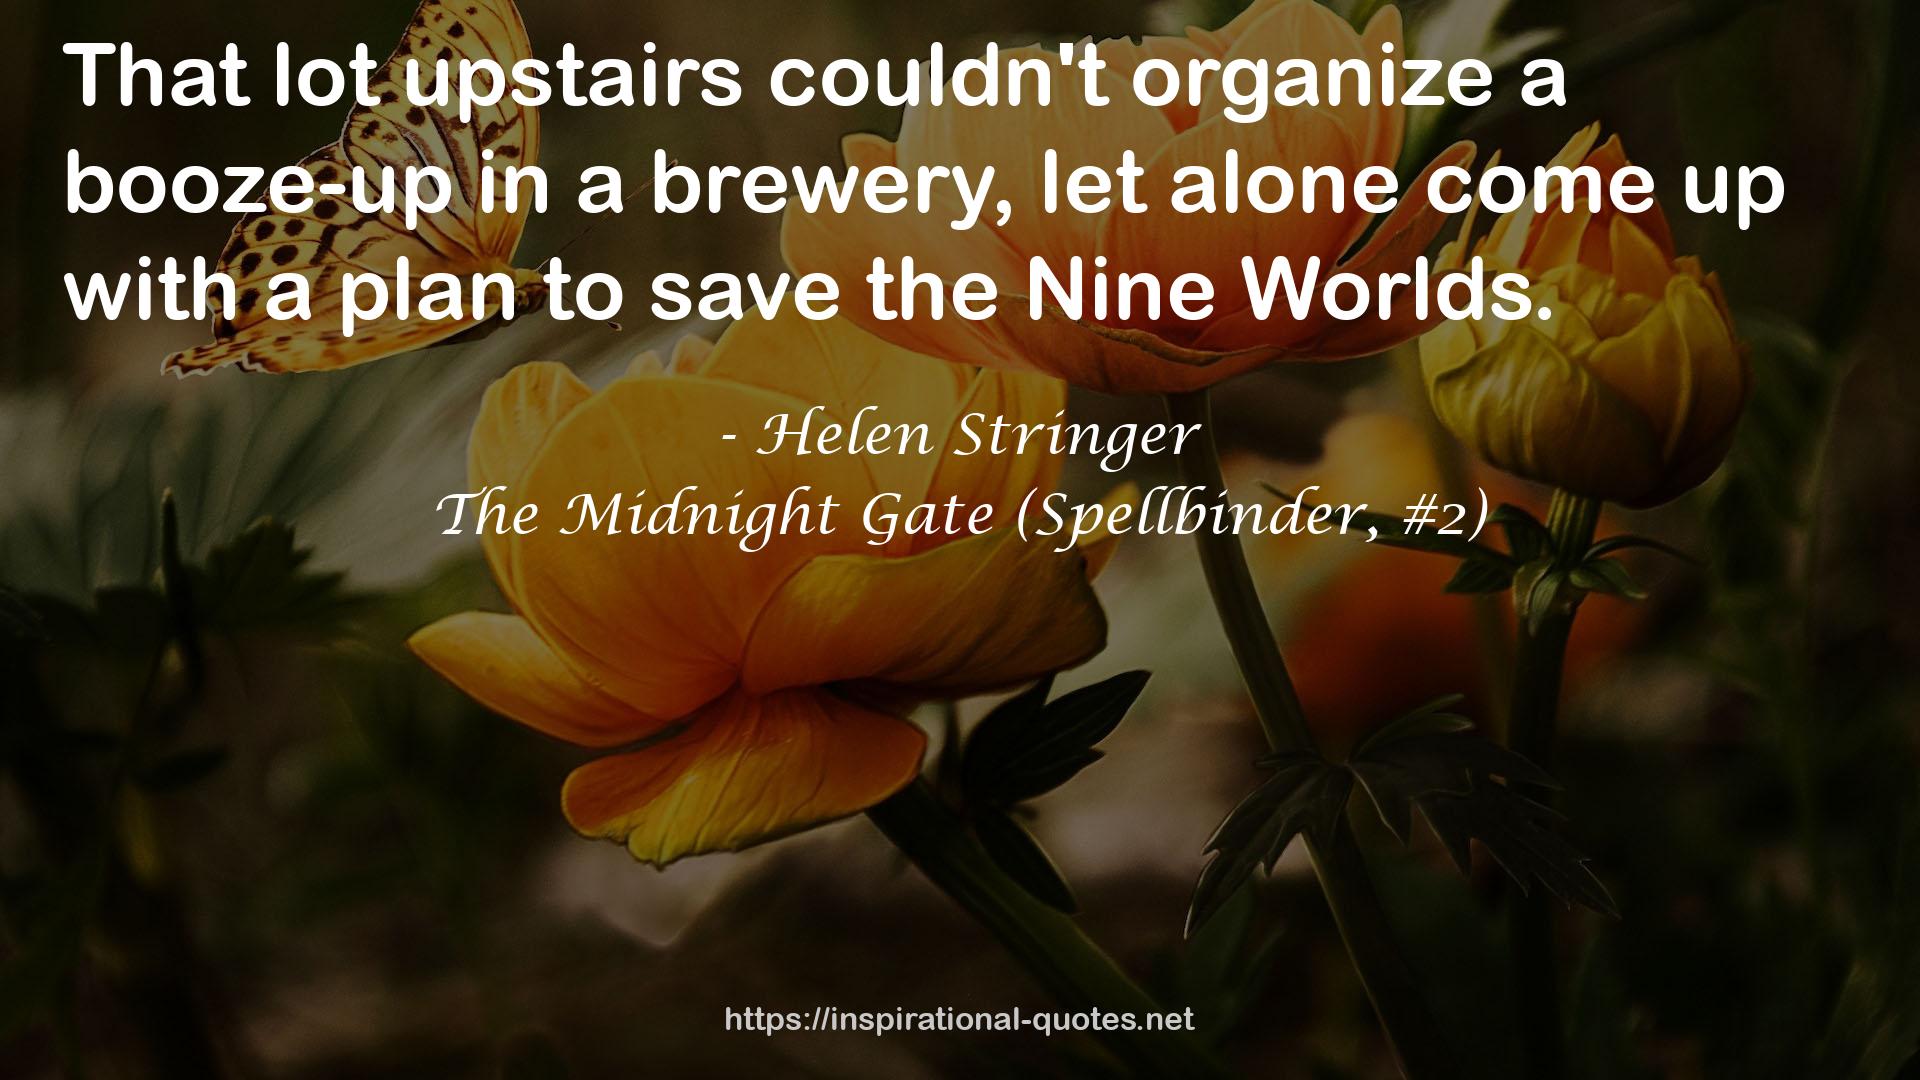 The Midnight Gate (Spellbinder, #2) QUOTES